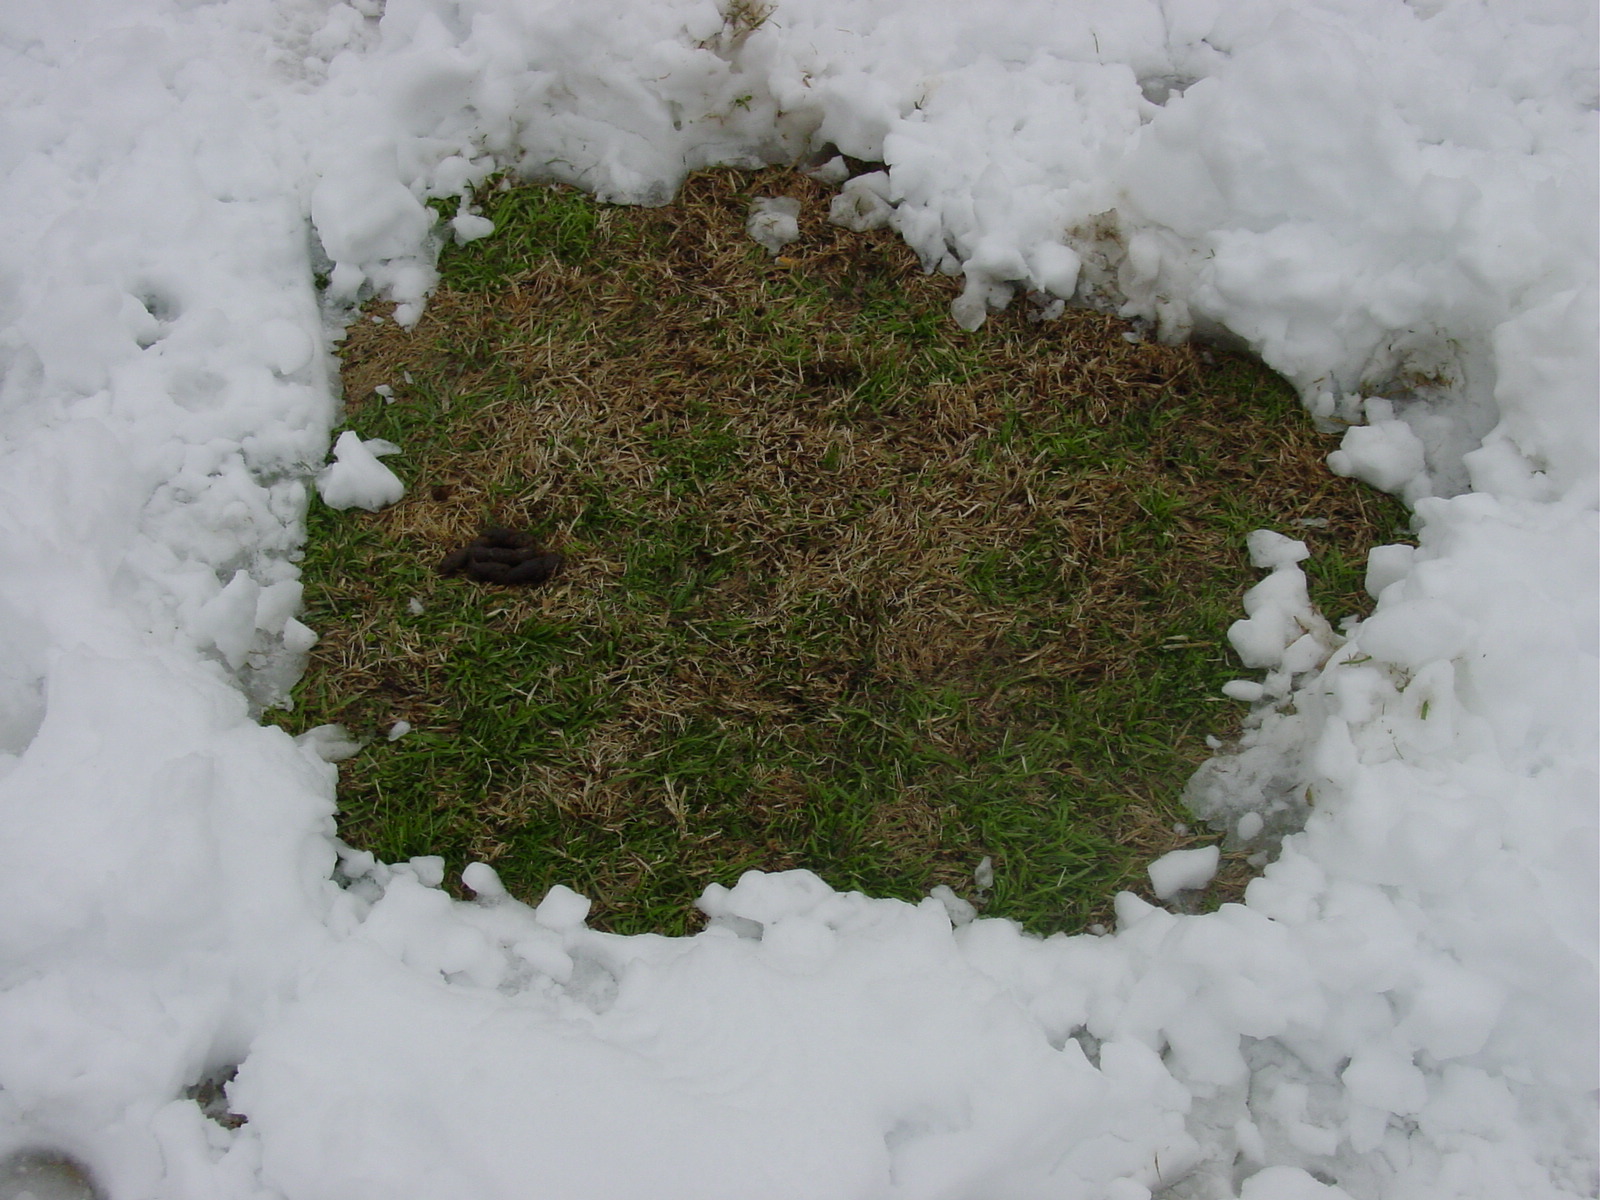 27-5561. Potty hole in the snow.